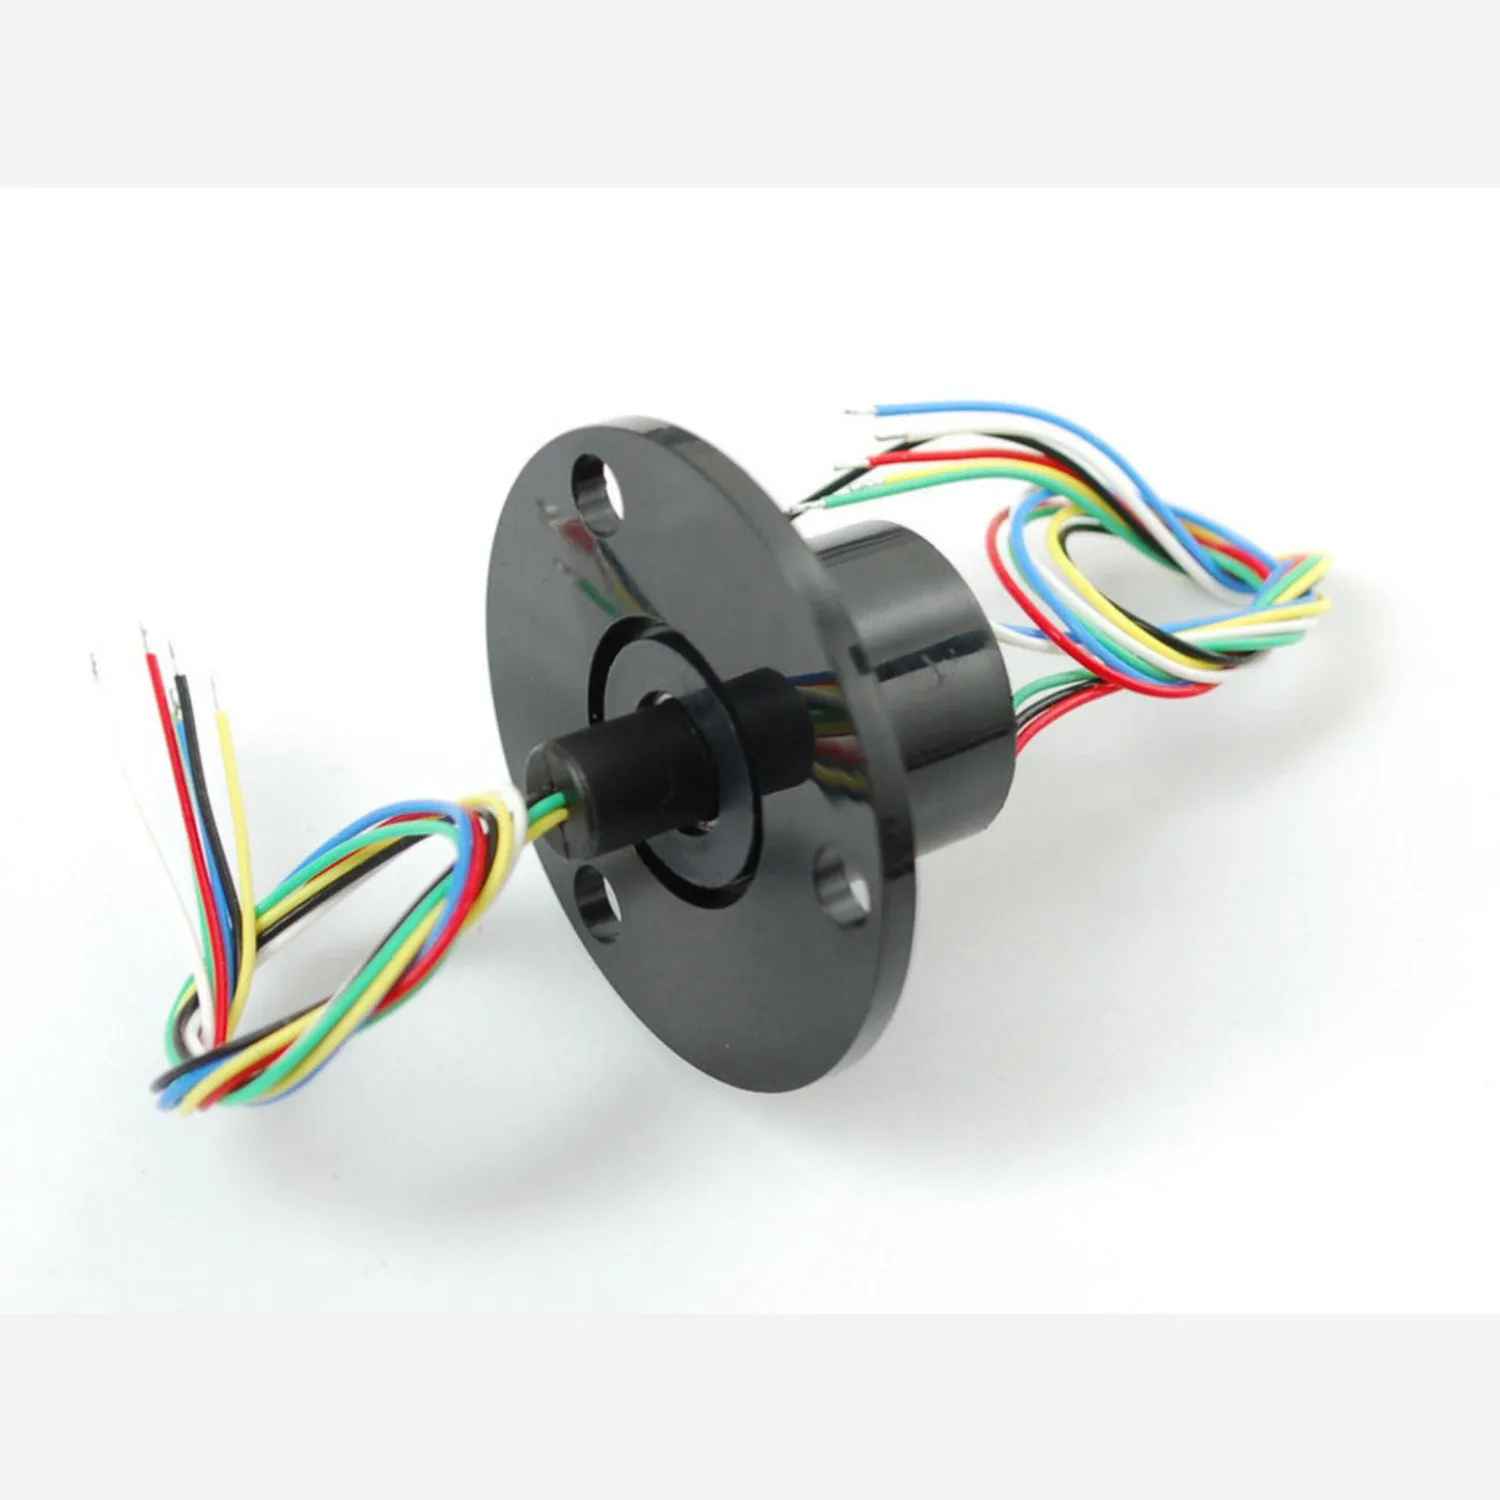 Photo of Slip Ring with Flange - 22mm diameter, 6 wires, max 240V @ 2A